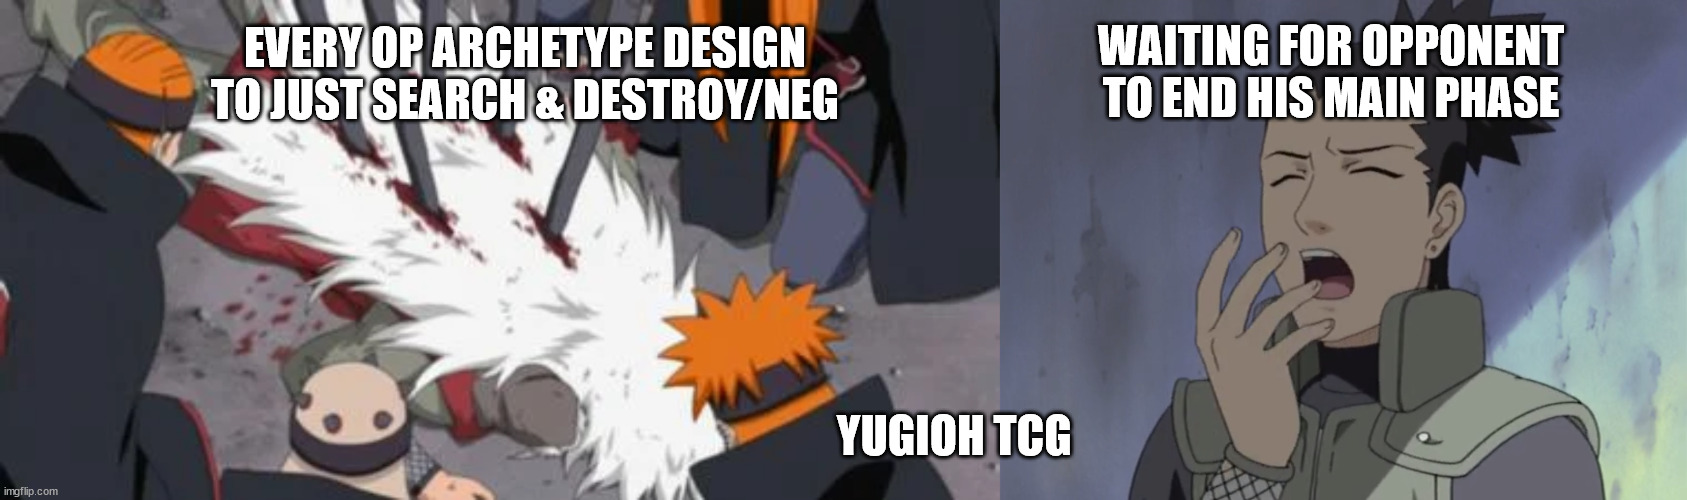 modern yugioh in a nutshell v3 |  EVERY OP ARCHETYPE DESIGN TO JUST SEARCH & DESTROY/NEG; WAITING FOR OPPONENT TO END HIS MAIN PHASE; YUGIOH TCG | image tagged in yugioh,naruto,magic the gathering | made w/ Imgflip meme maker